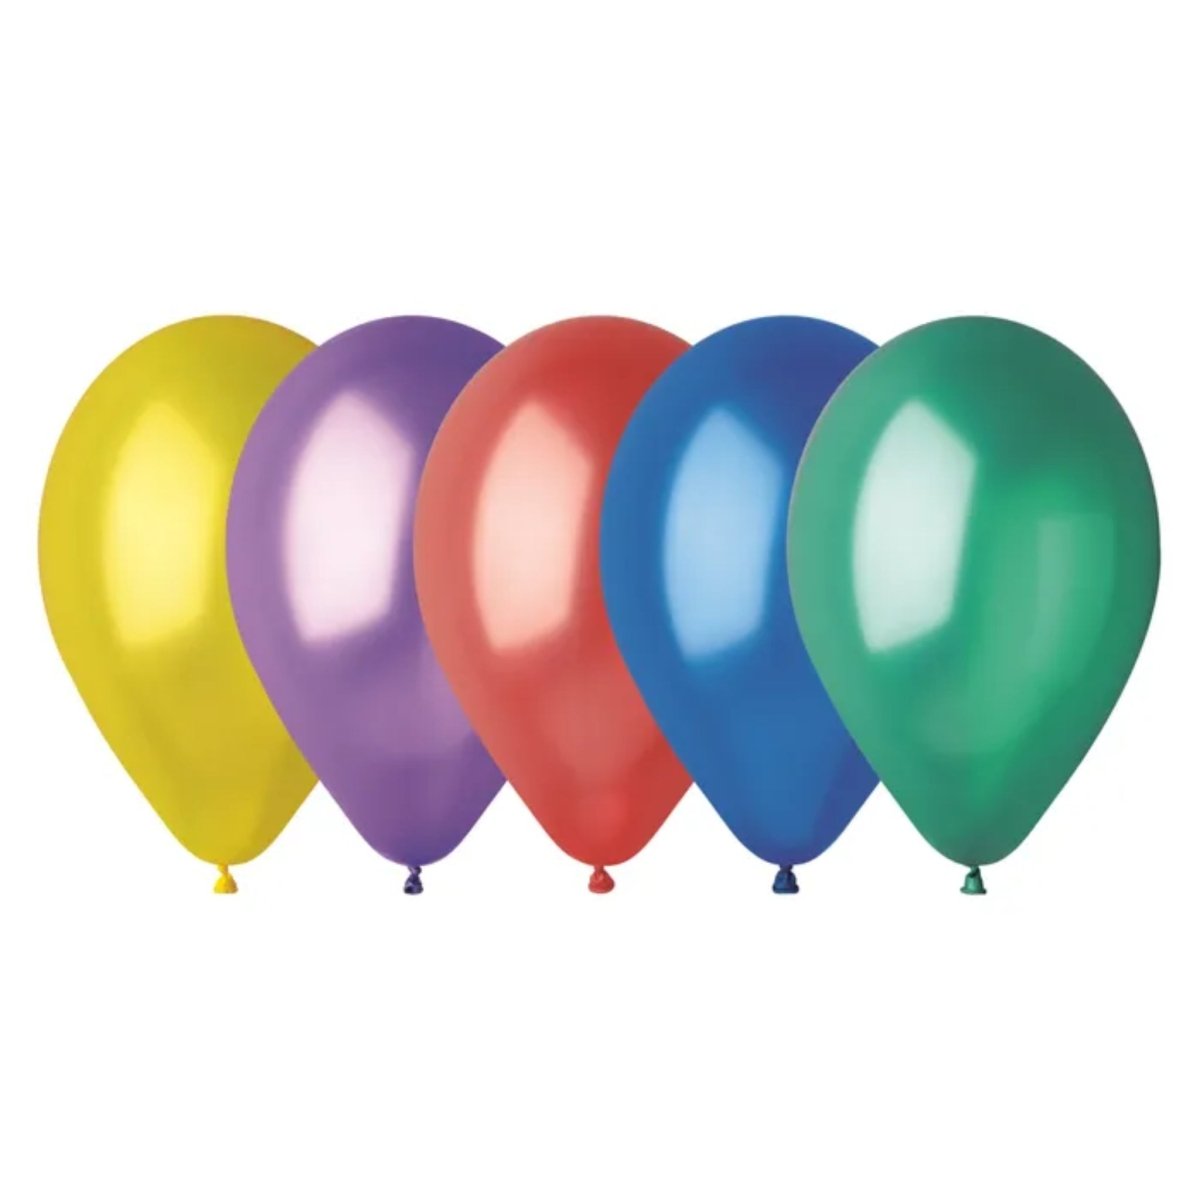 Metallic Coloured Balloons - 10 Pack - 28cm/11" - Kids Party Craft